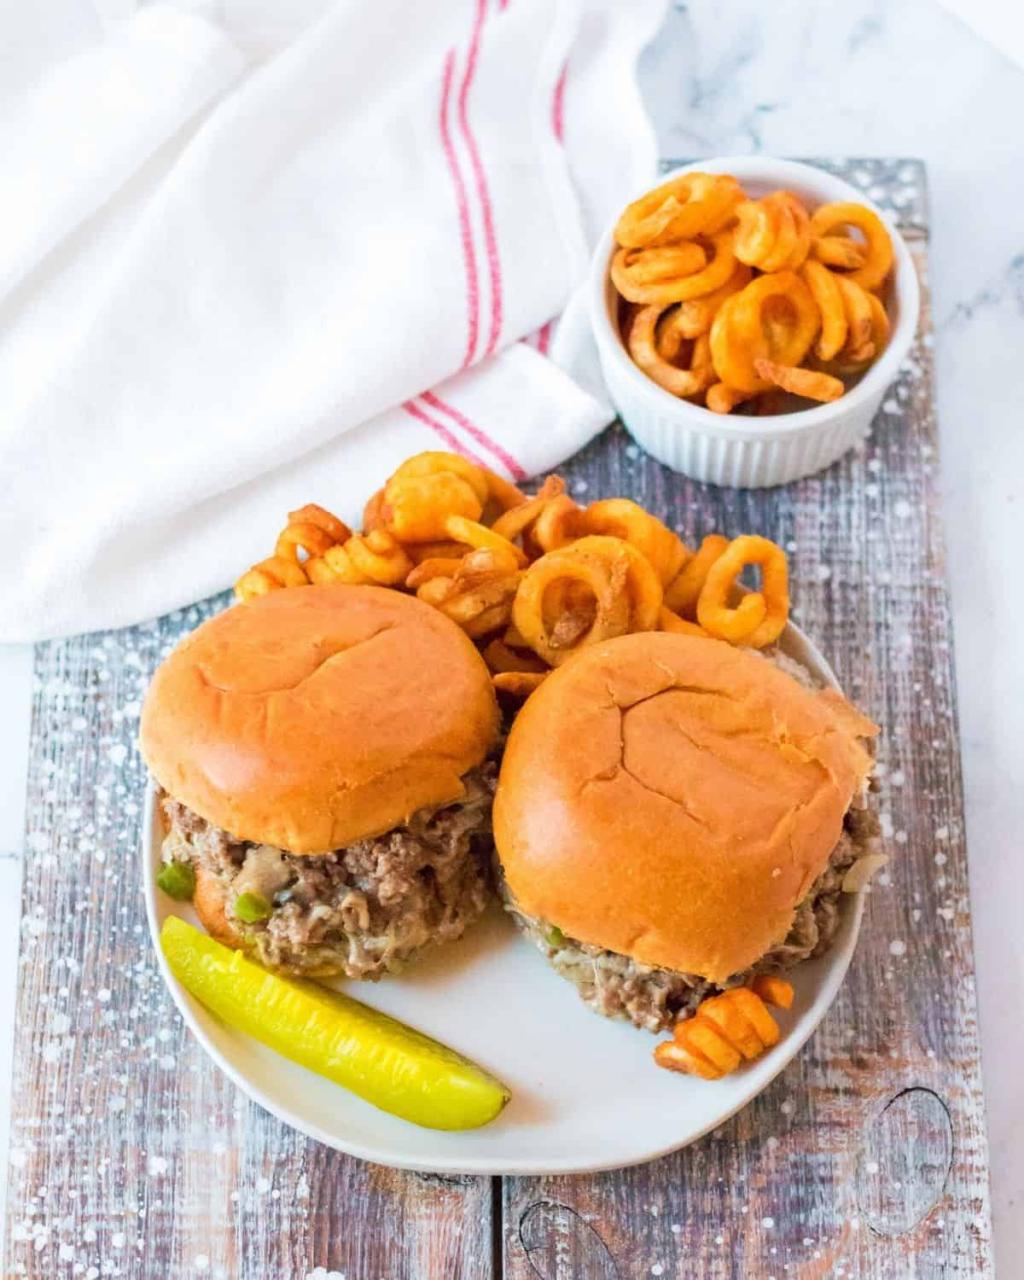 Philly Cheesesteak Sloppy Joes, Slow Cooker or Stovetop - Everyday Eileen